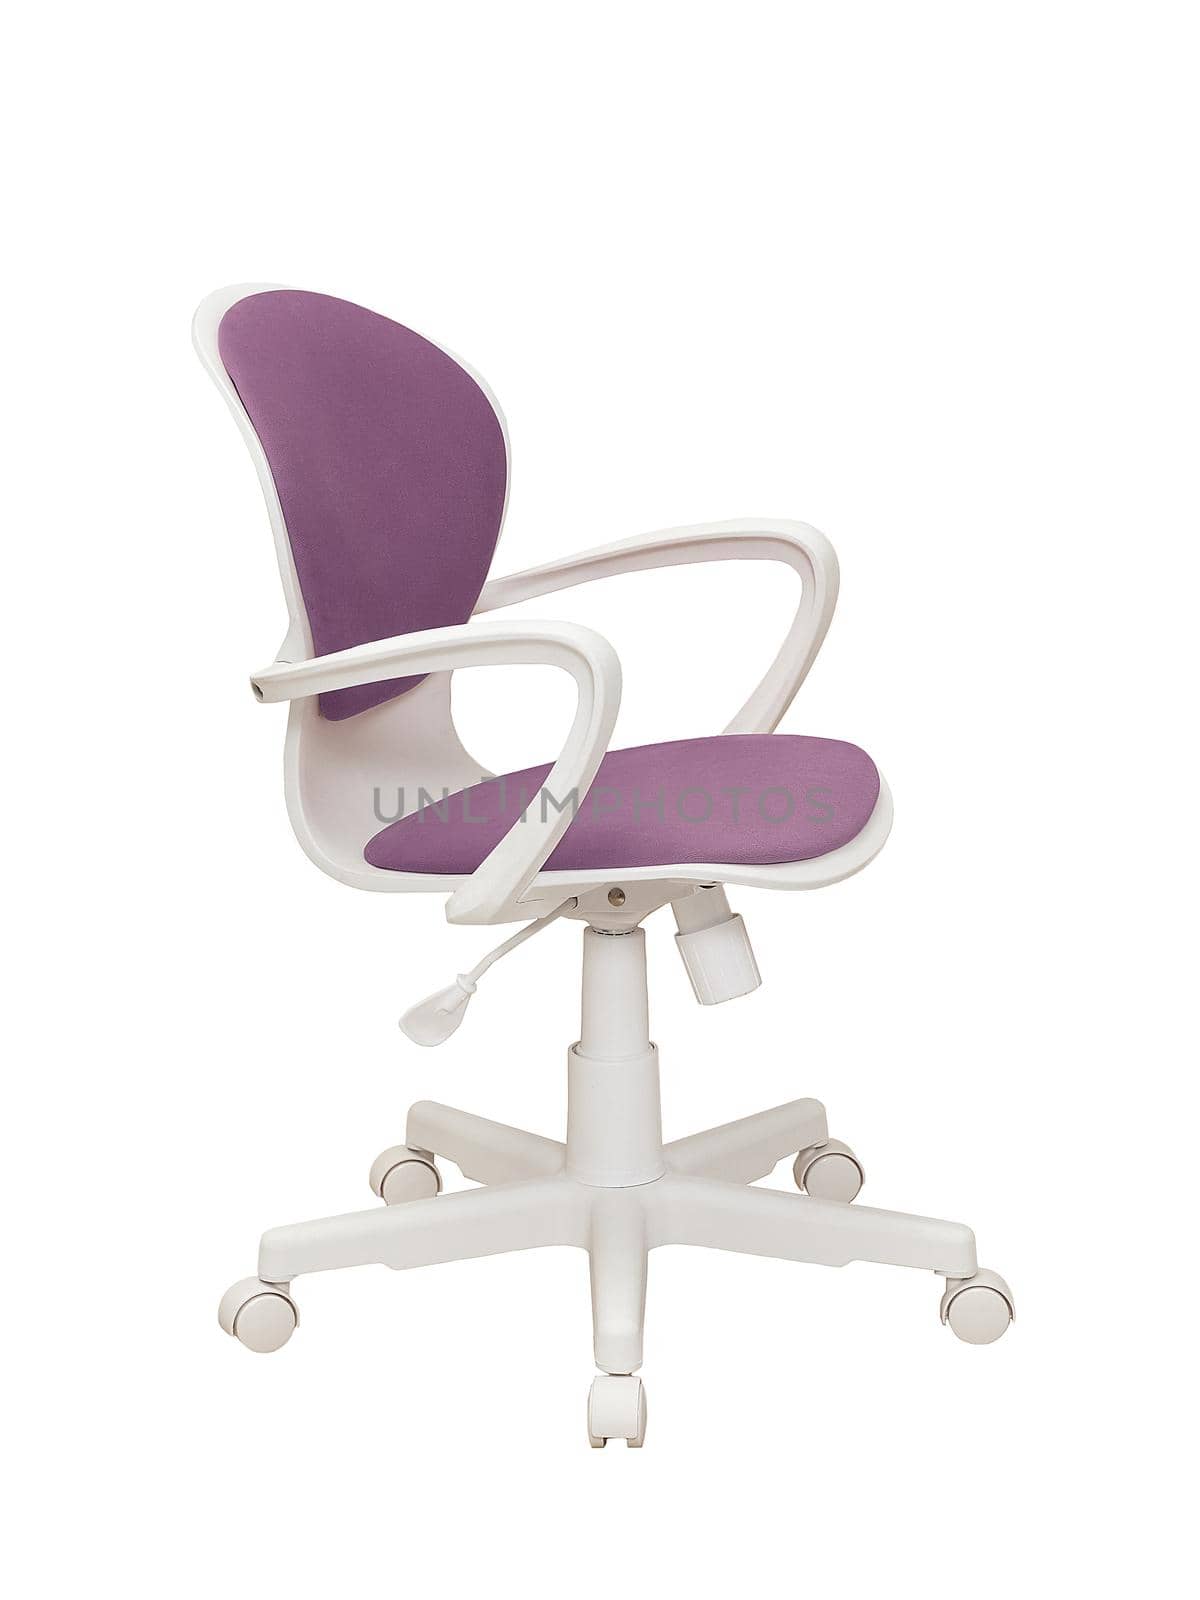 violet office fabric armchair on wheels isolated on white background, side view. modern furniture, interior, home design